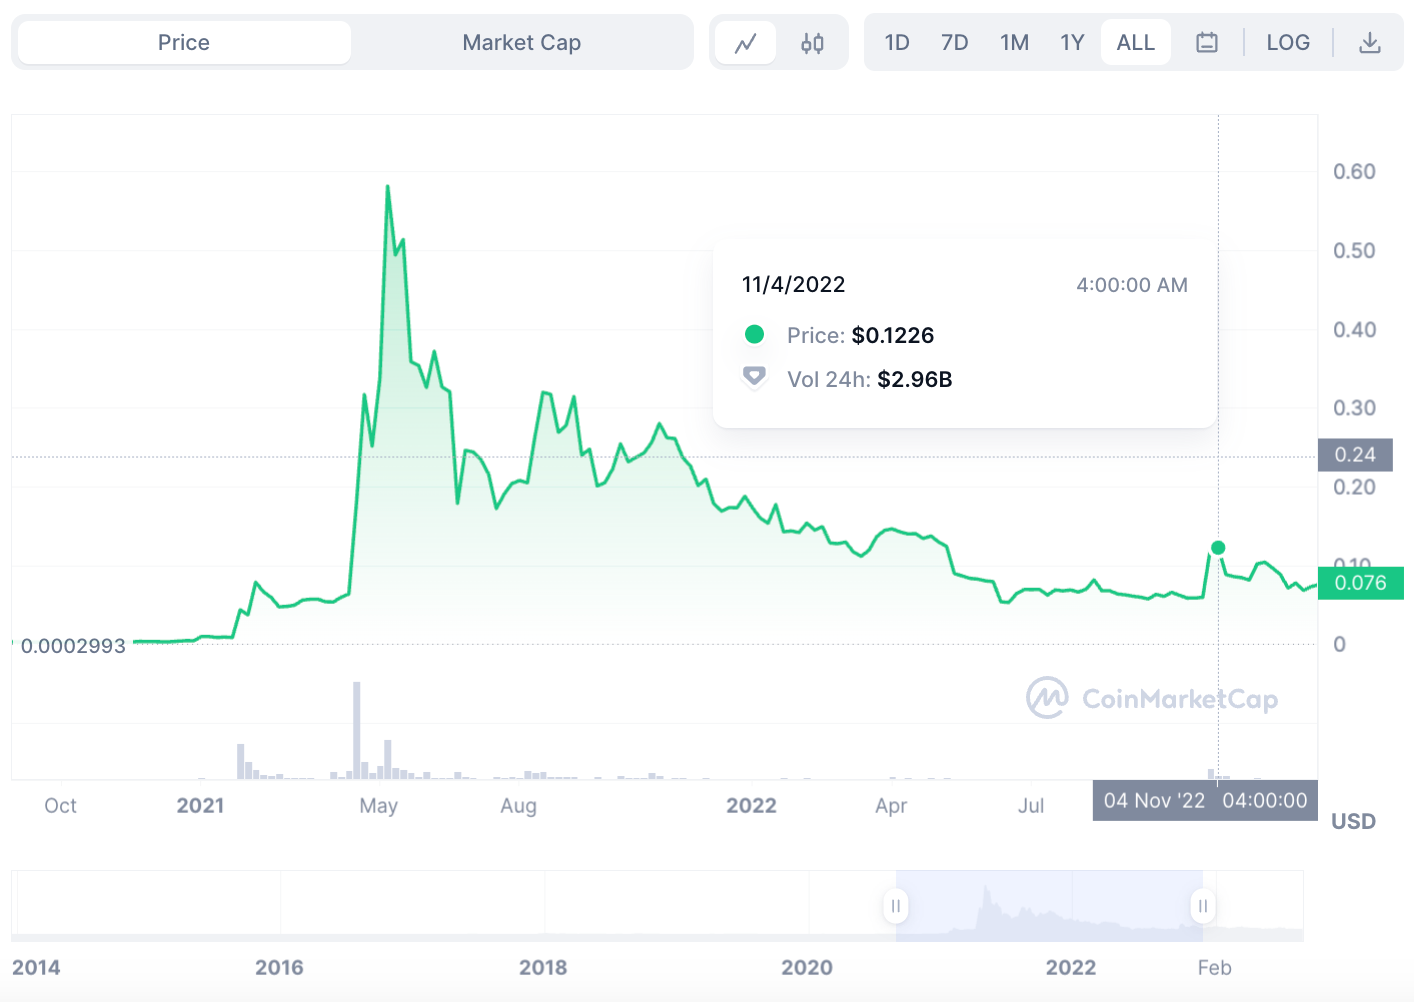 Can Dogecoin reach $1? An exhaustive exploration - f0be23be dc3d 4d88 86eb e7c370745934